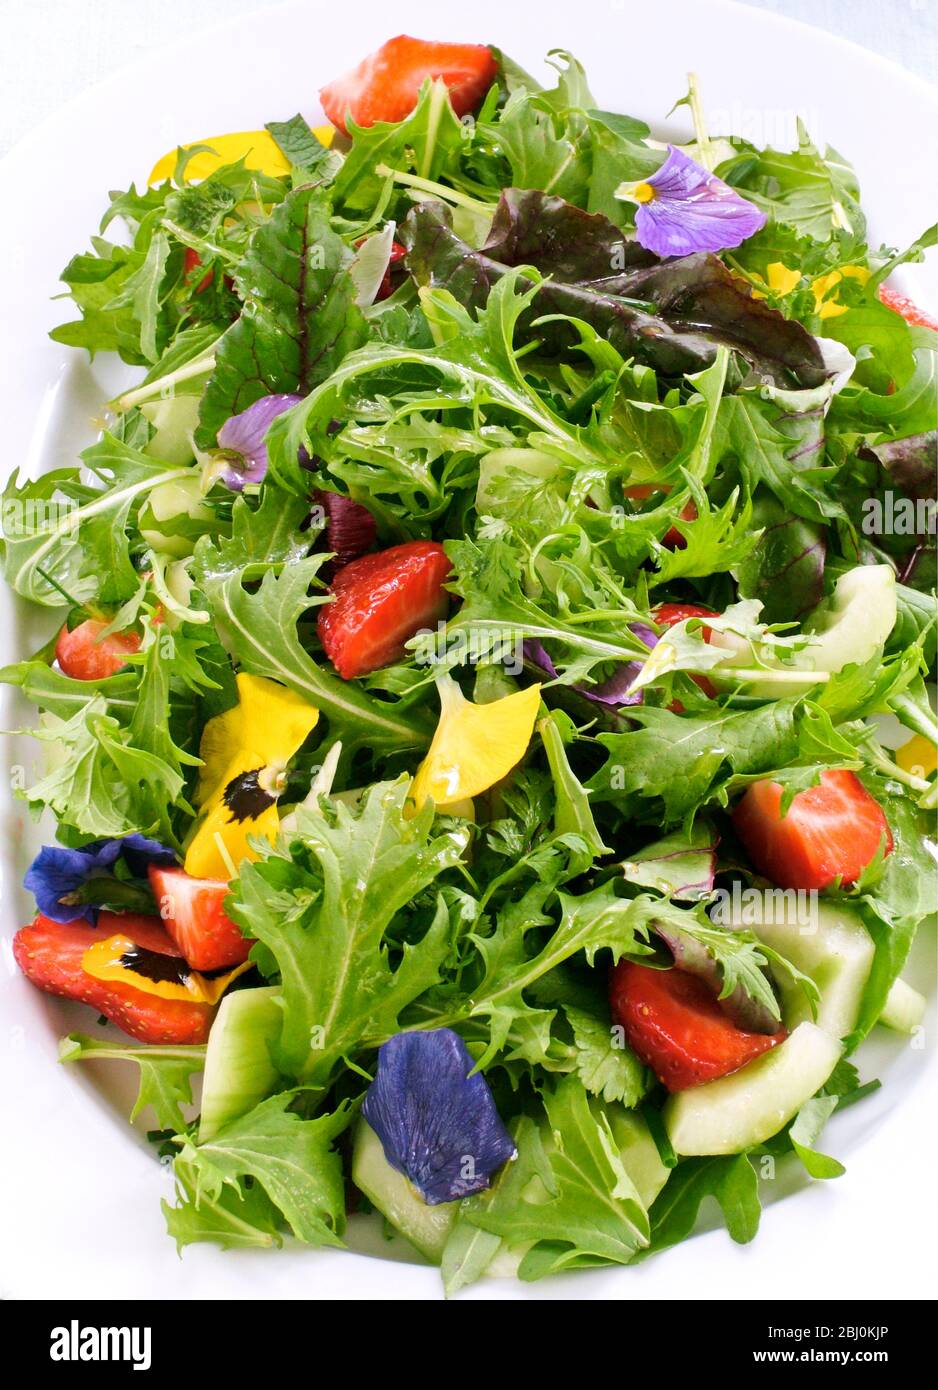 Pretty salad with mixed baby leaves, rocket, cucumber, strawberries and pansy flowers - Stock Photo